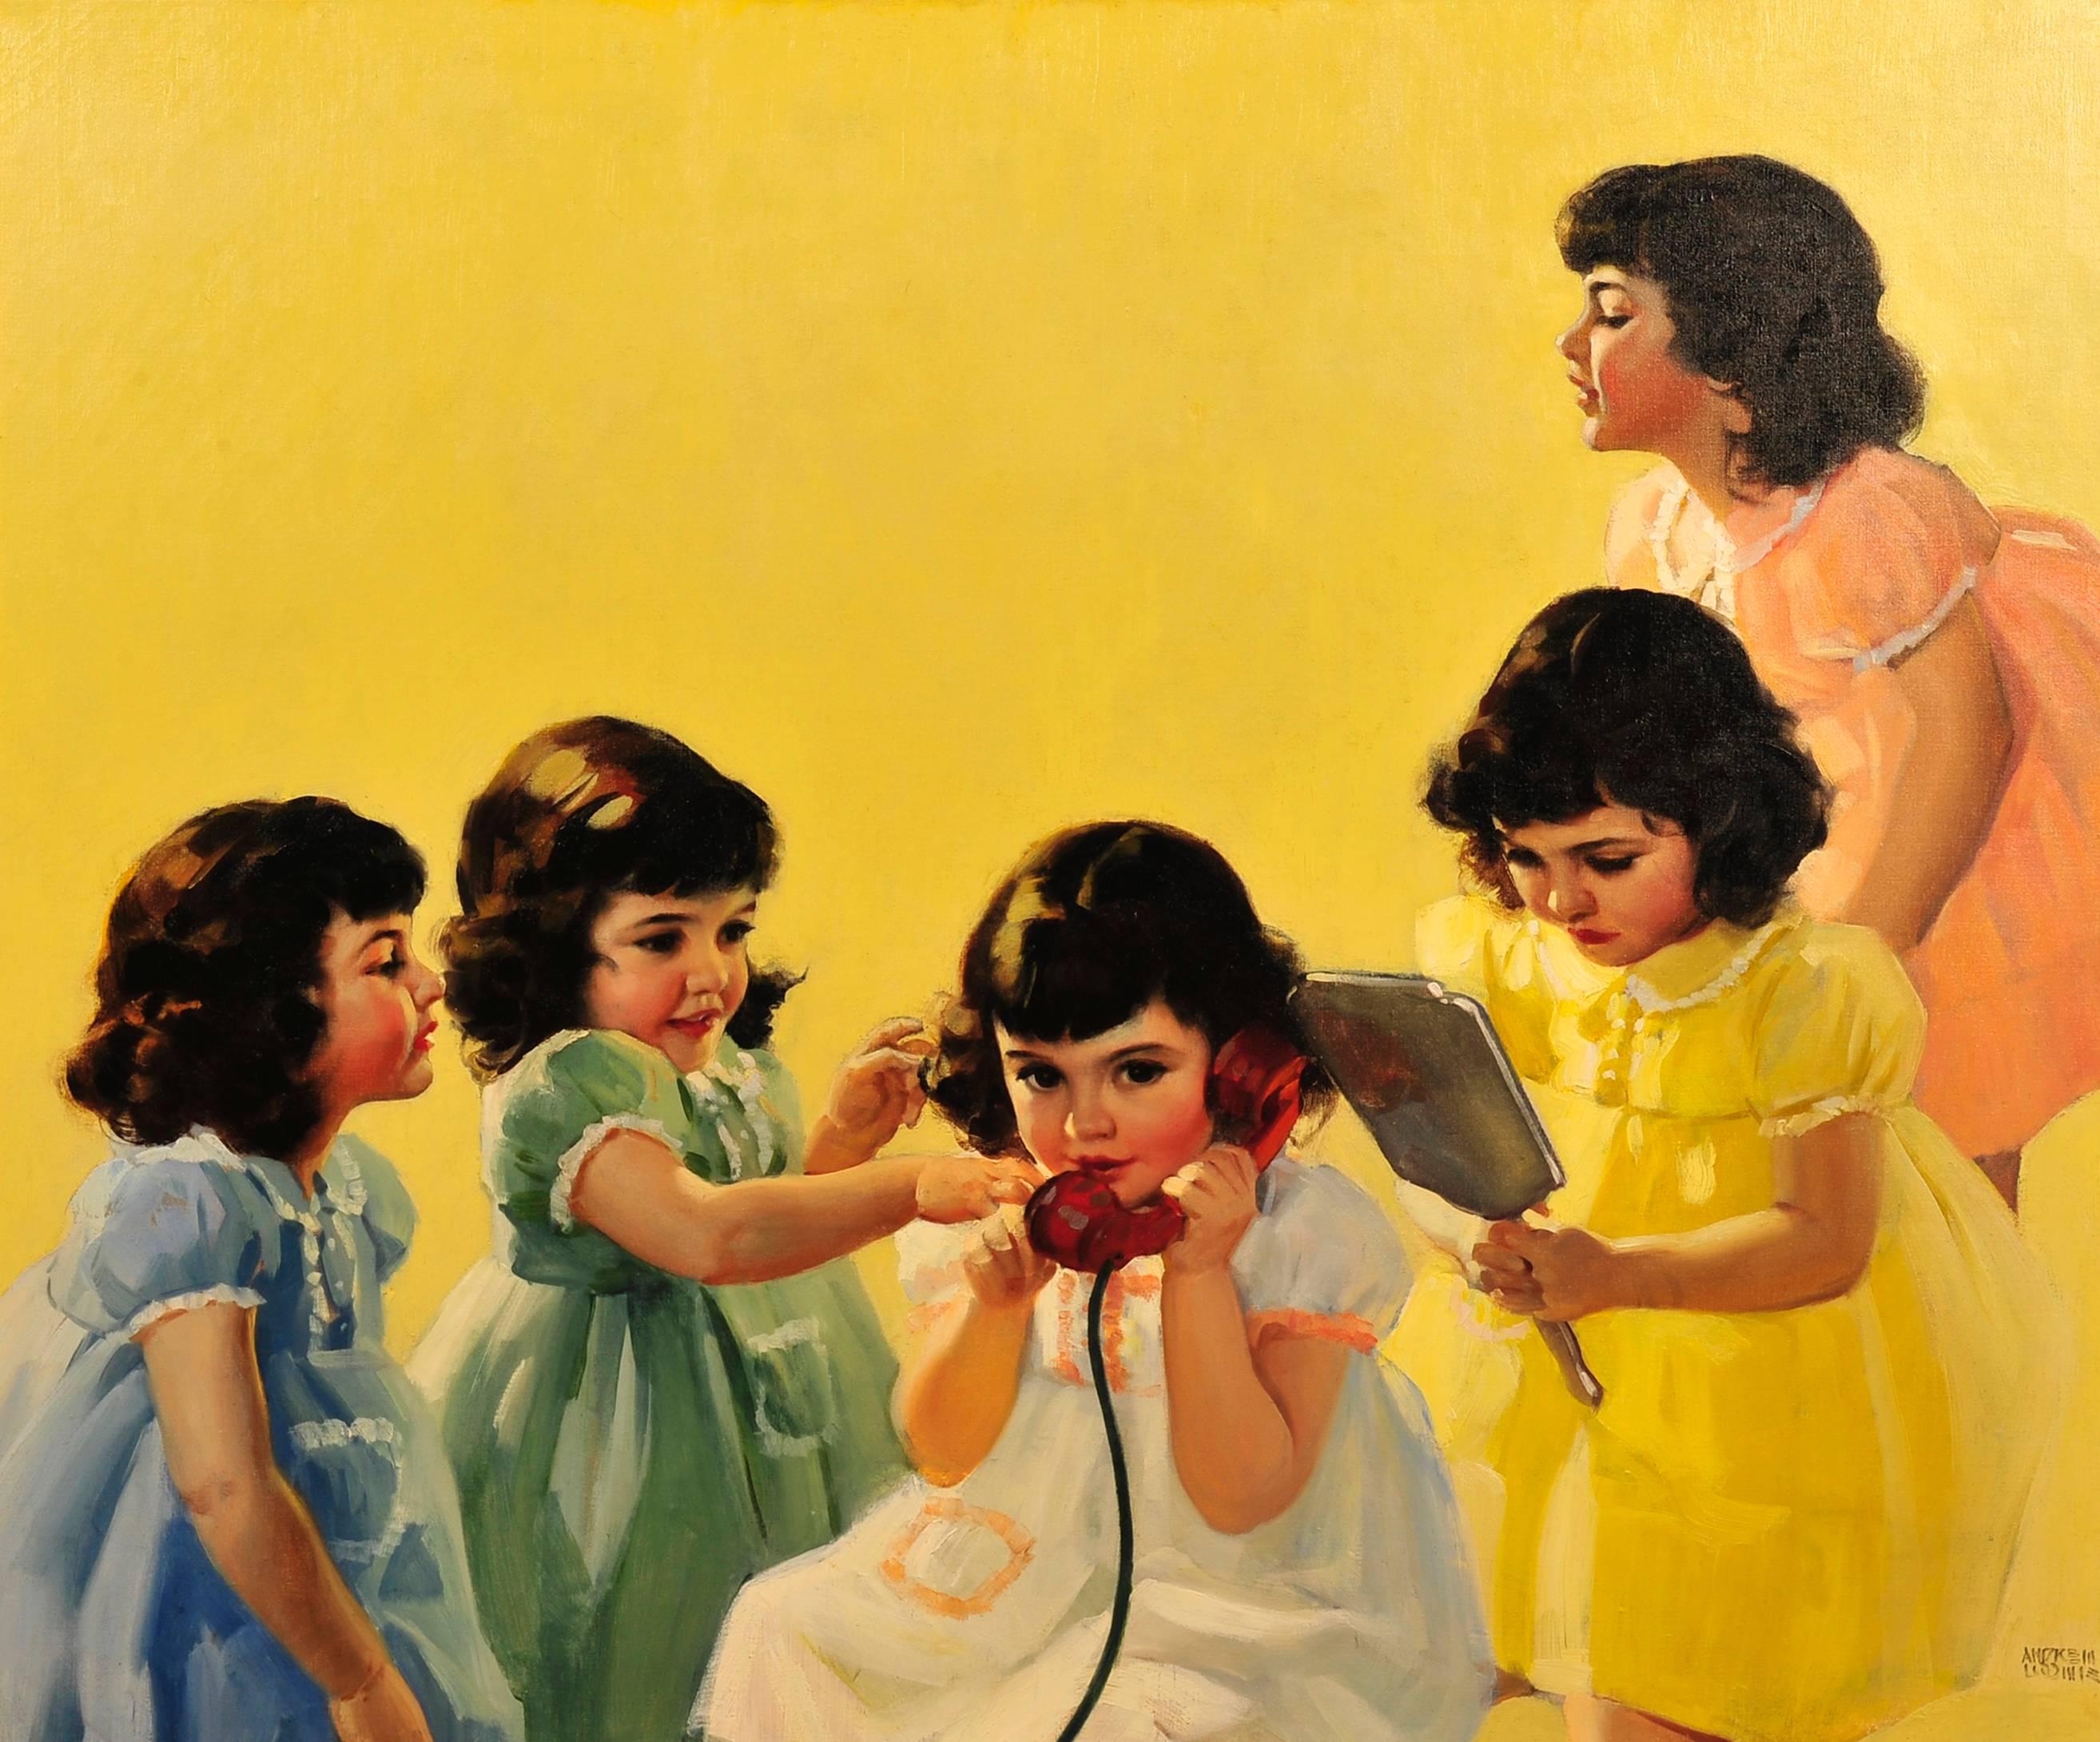 Dionne Quintuplets - Calendar Illustration - Painting by Andrew Loomis